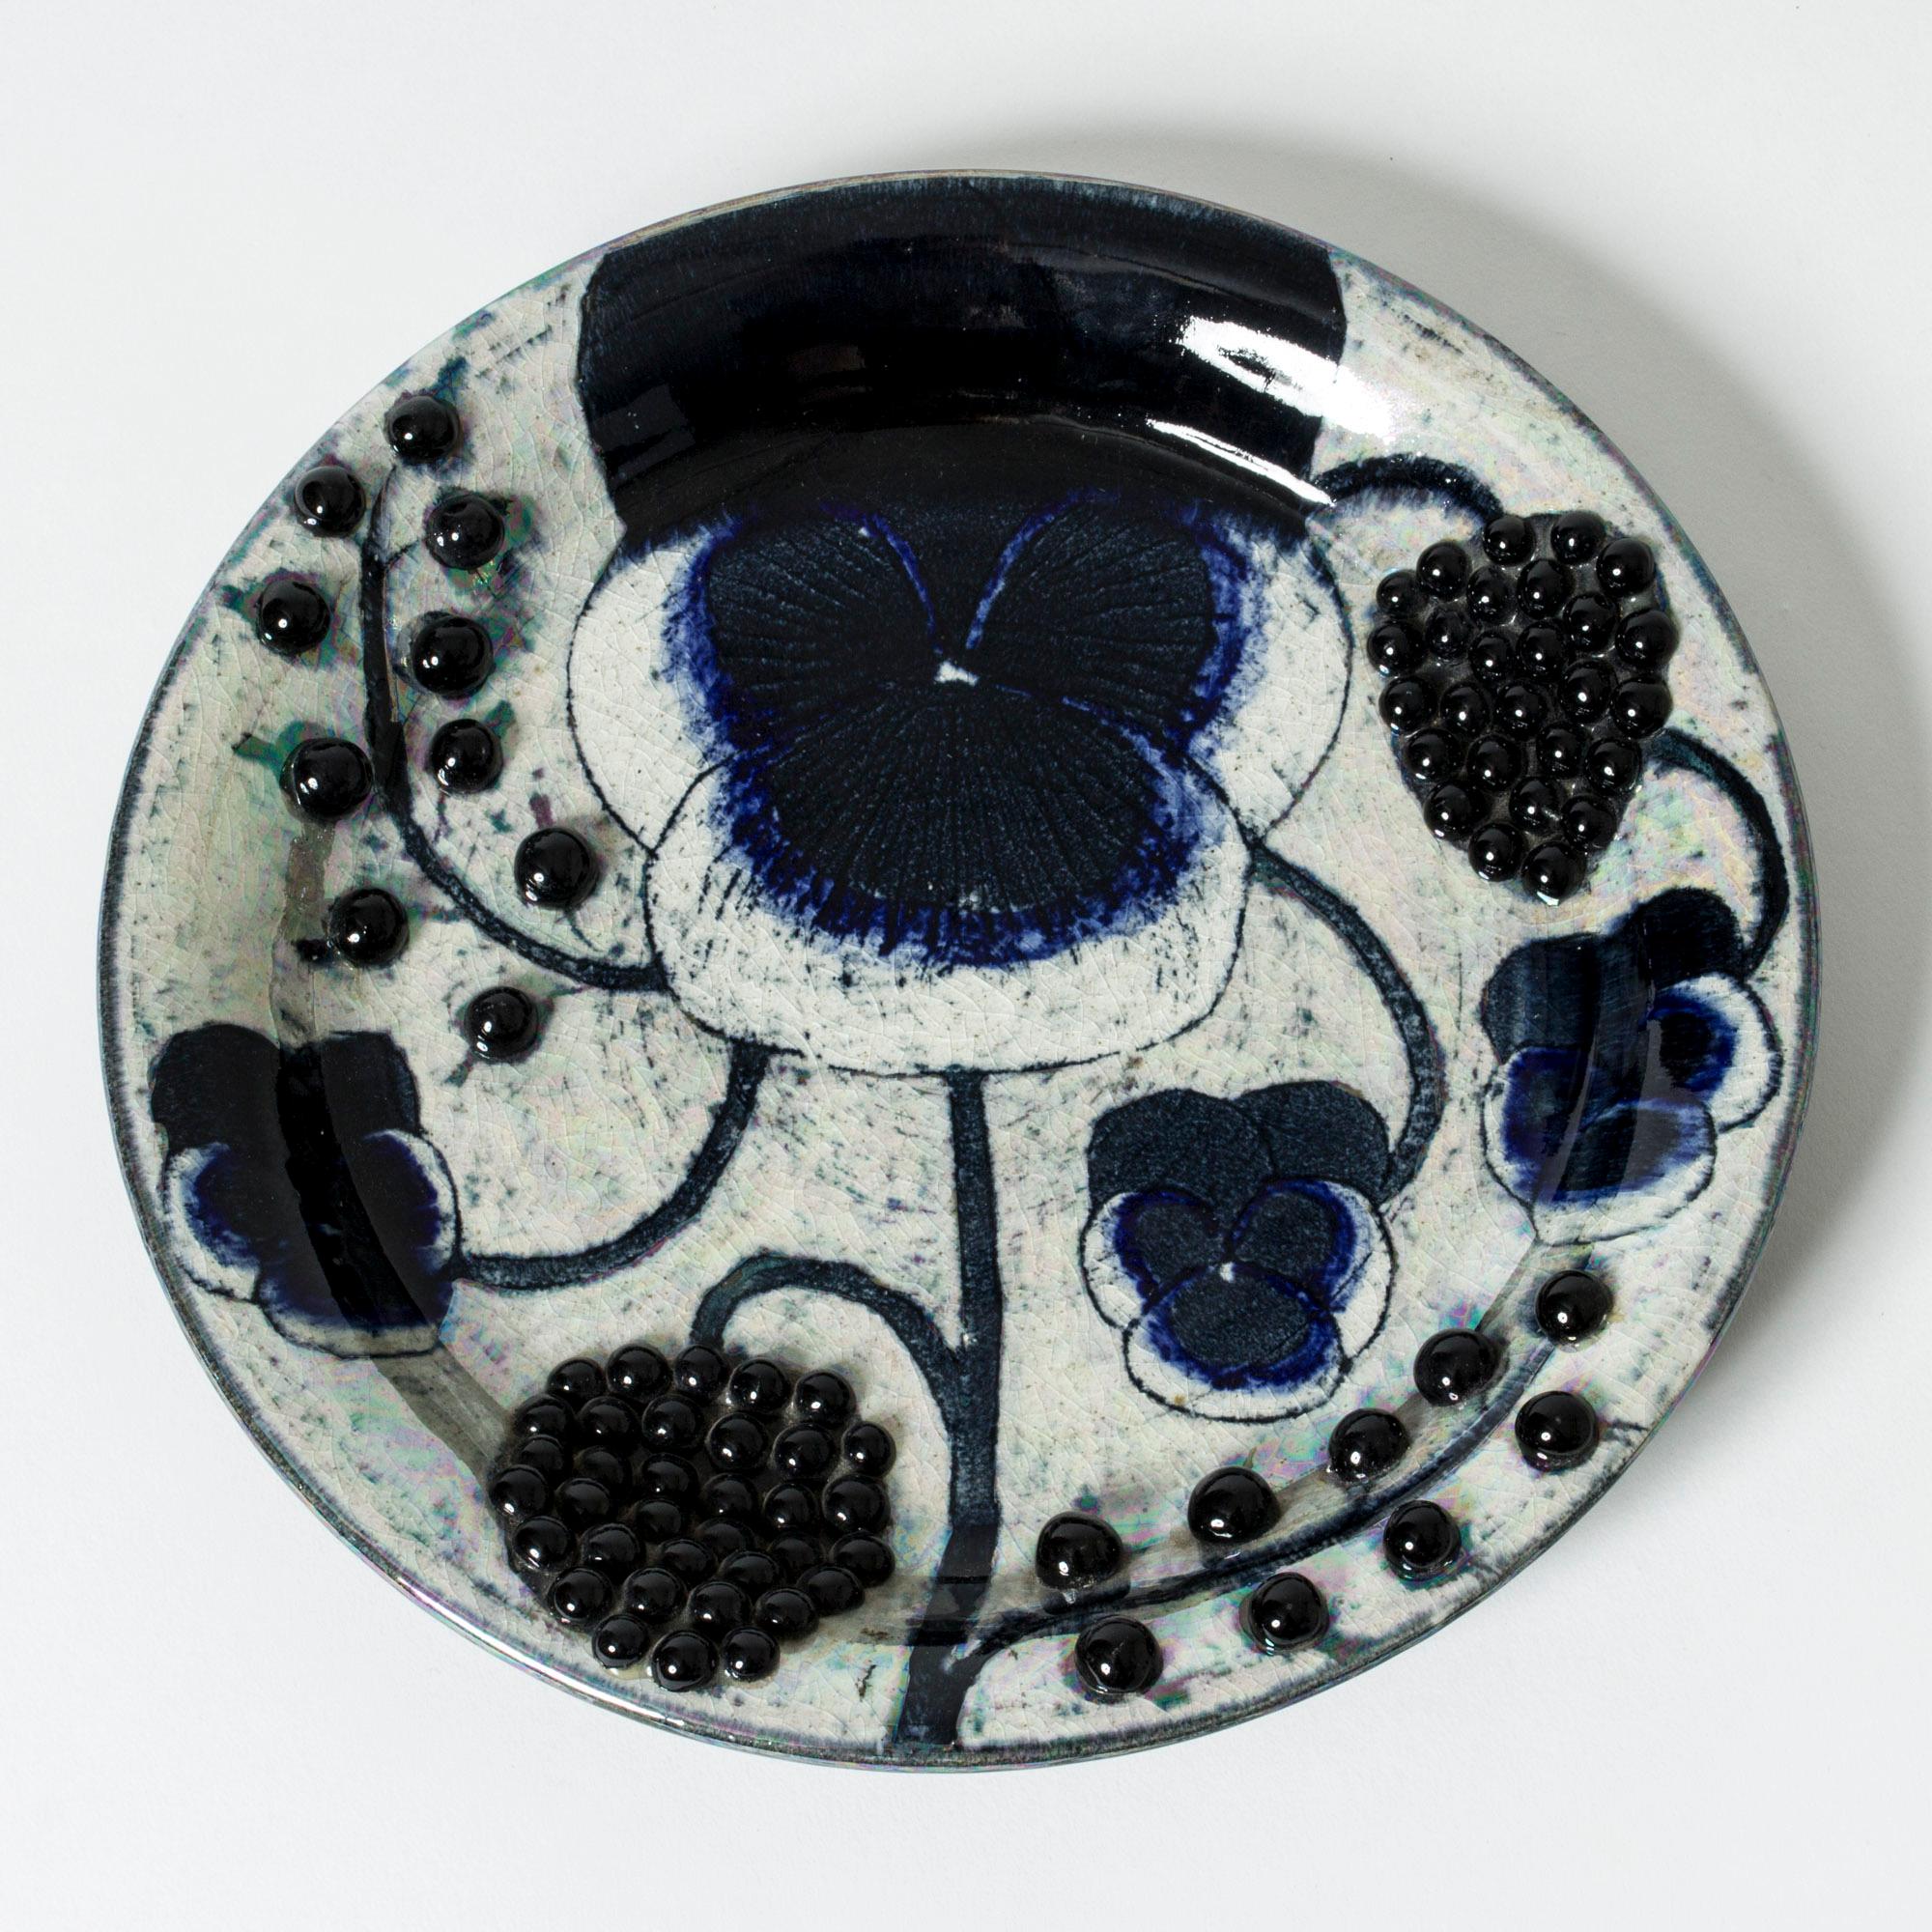 Beautiful, unique stoneware platter by Birger Kaipiainen in an oval form. Motif of a pale yellow poppy with black round seeds in relief, contrasting in a suggestive way against a dark background. Highlights of iridescent glaze.